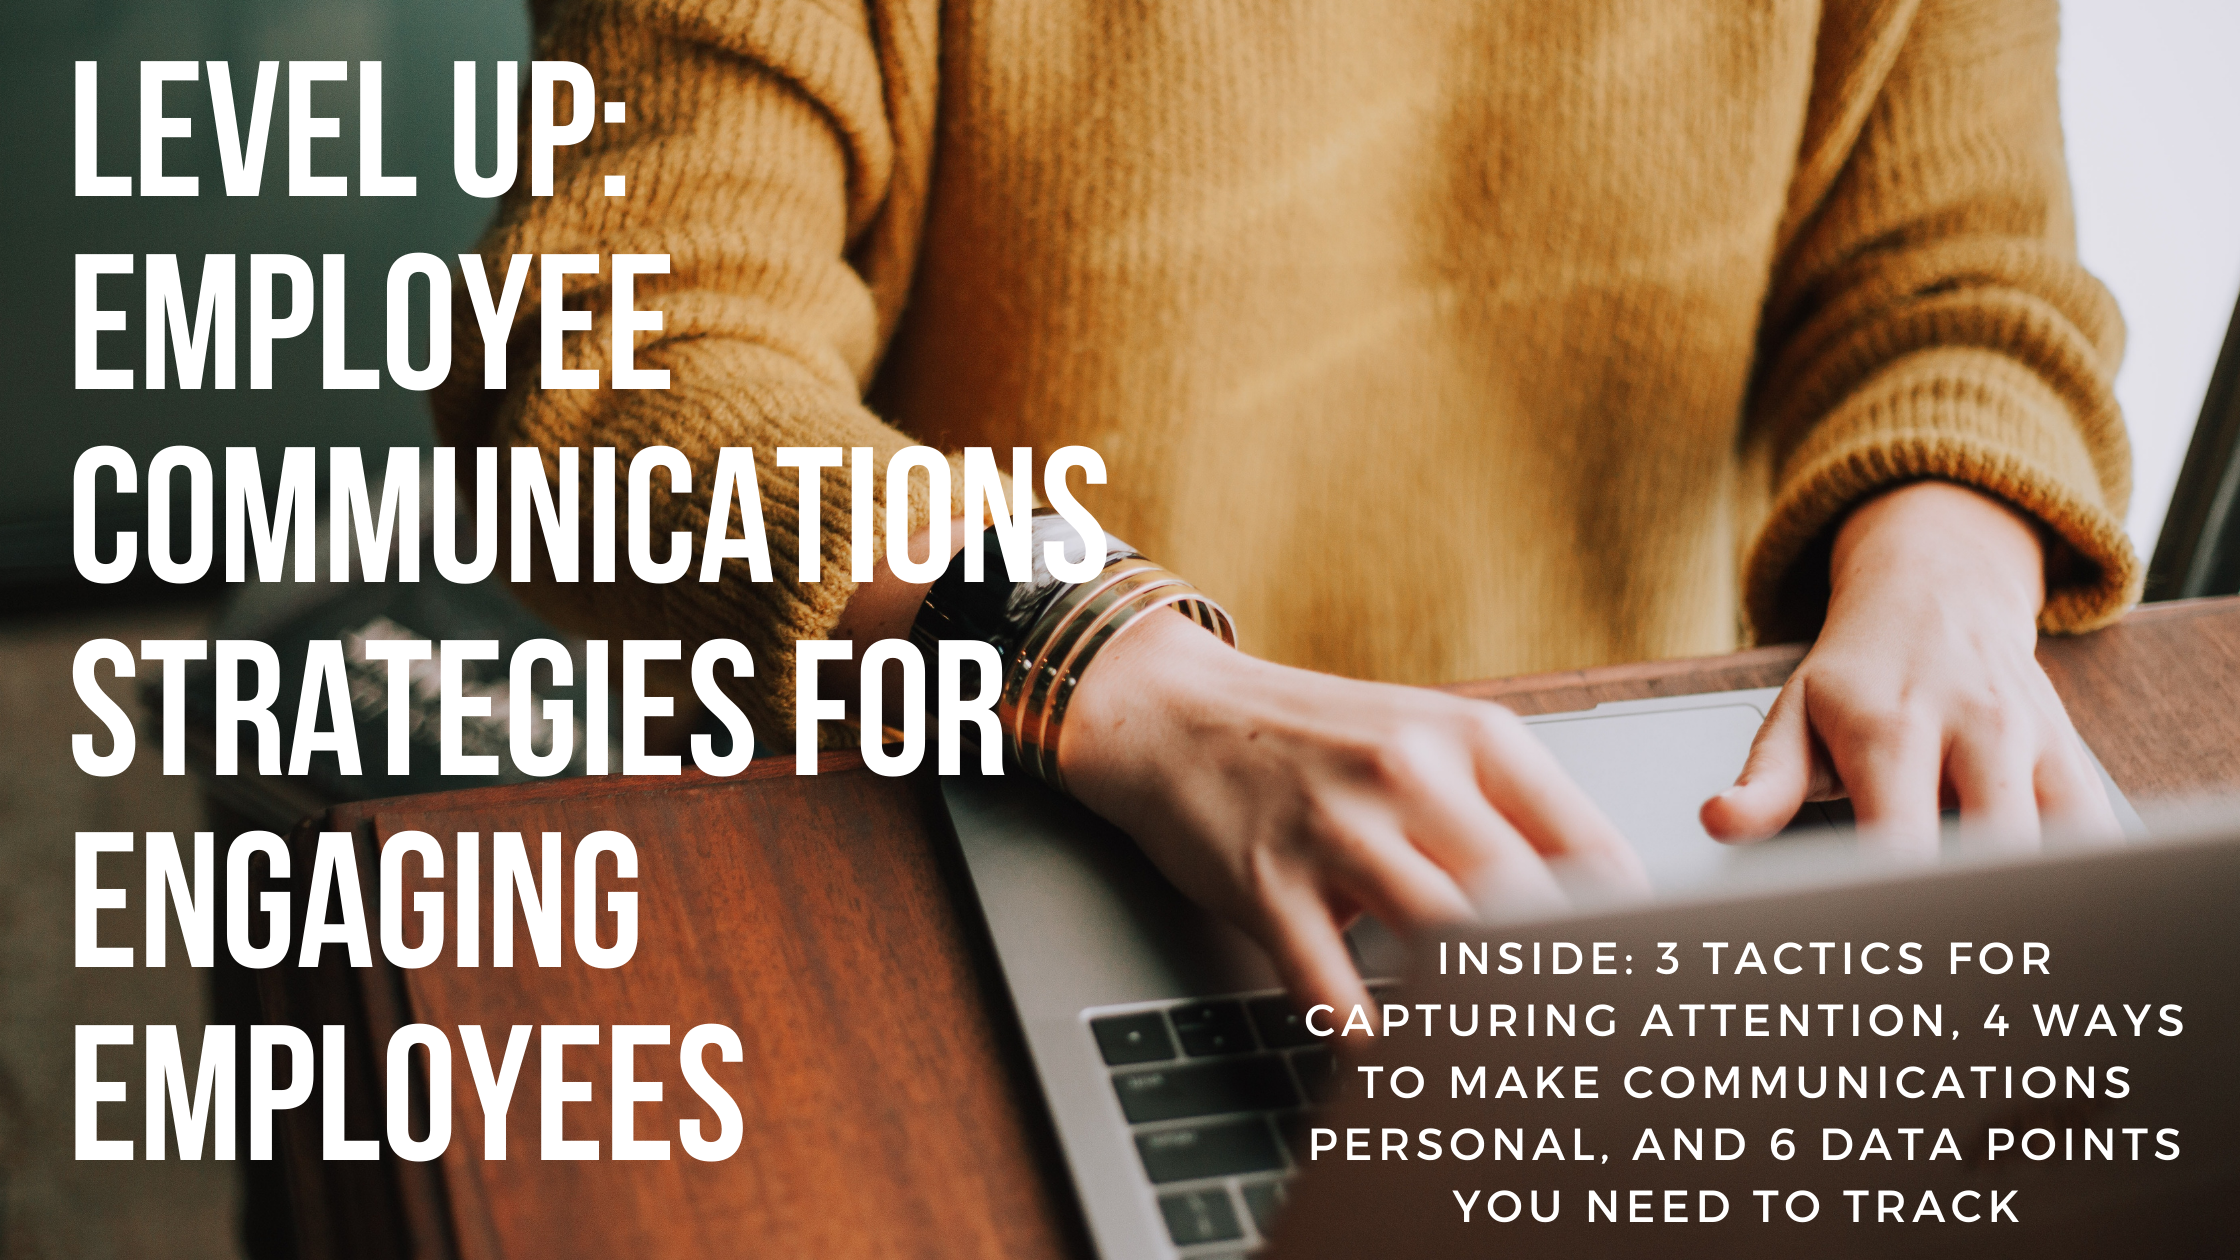 Level Up Employee Communications Strategies for Engaging Employees